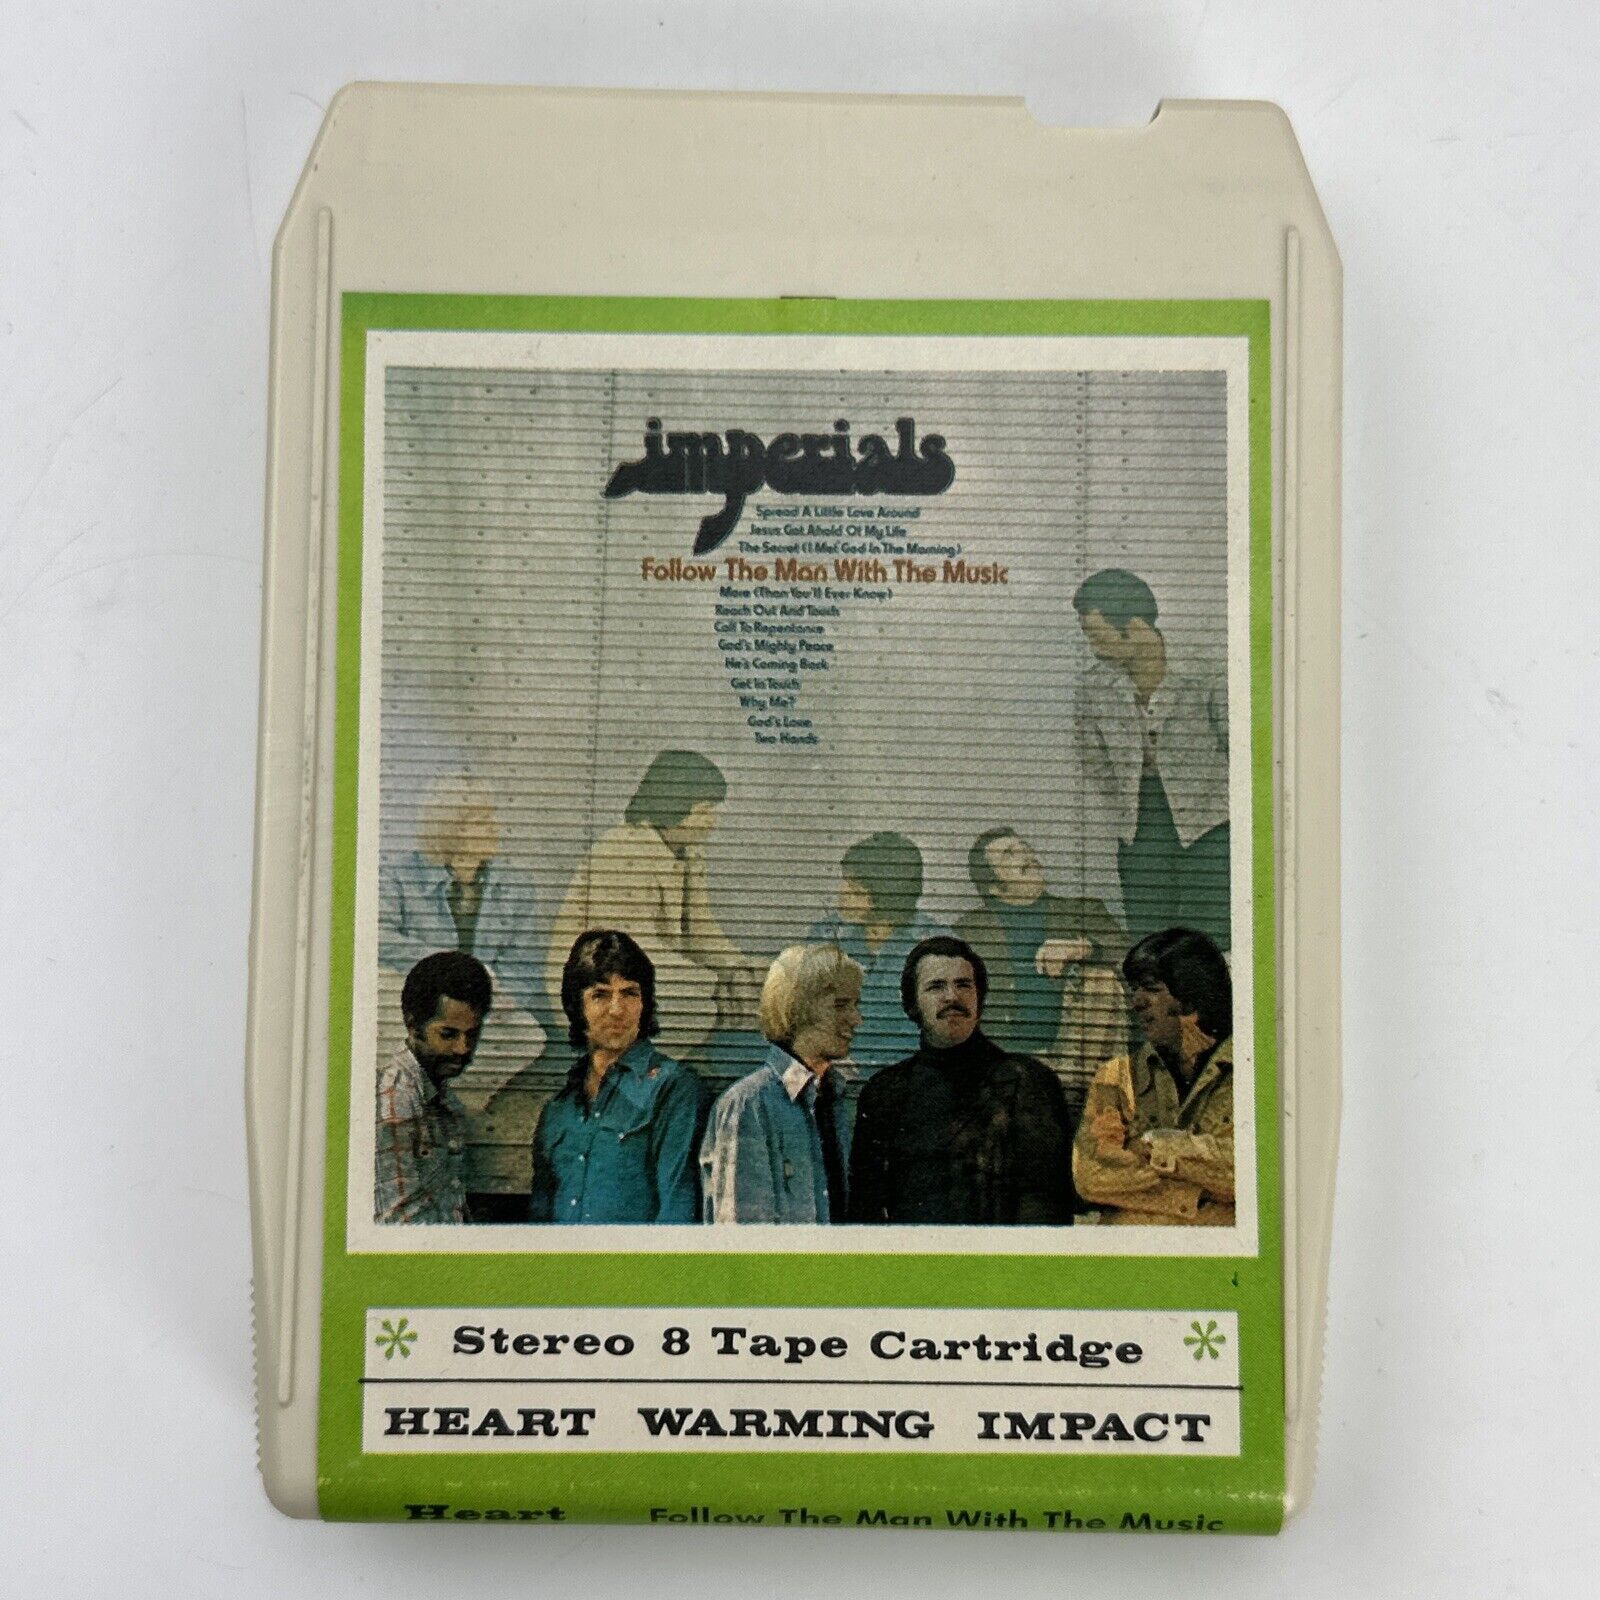 Imperials Follow The Man With The Music (8-Track Tape)